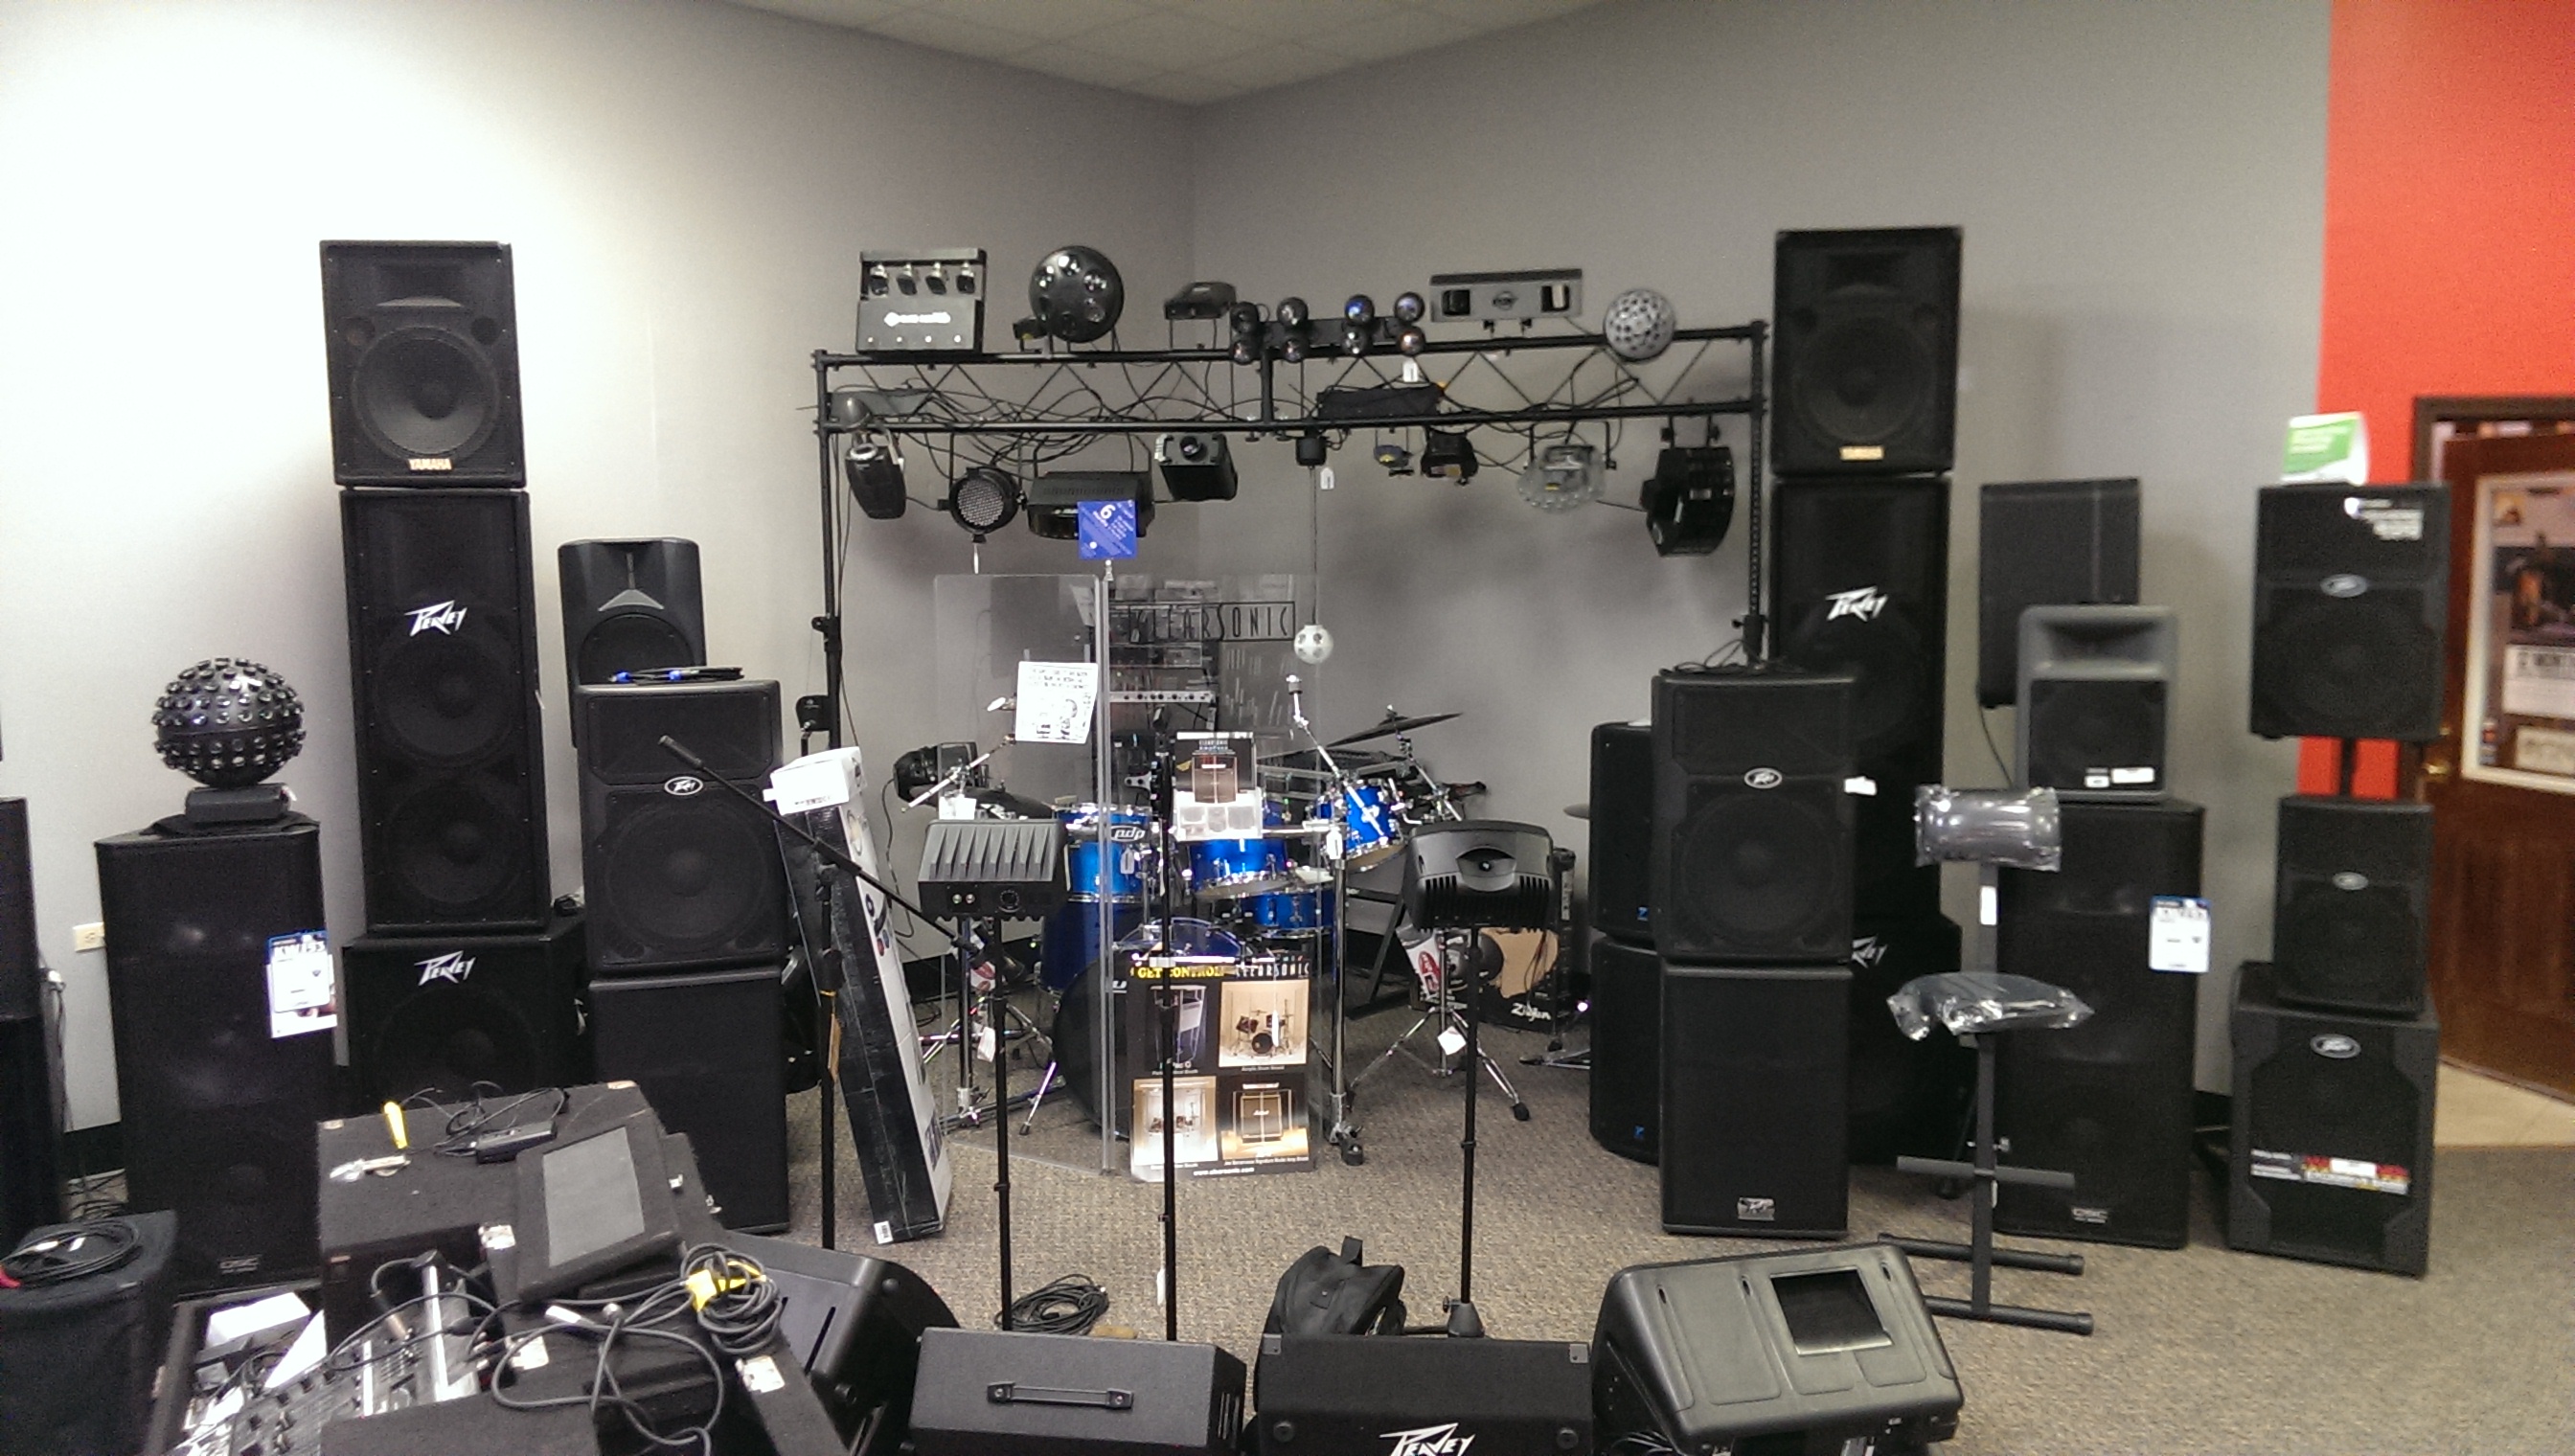 Will West music and Sound is your one stop shop for all things music... Especially Live on-stage sound and lighting! QSC, YAMAHA, JBL, and much much more! 